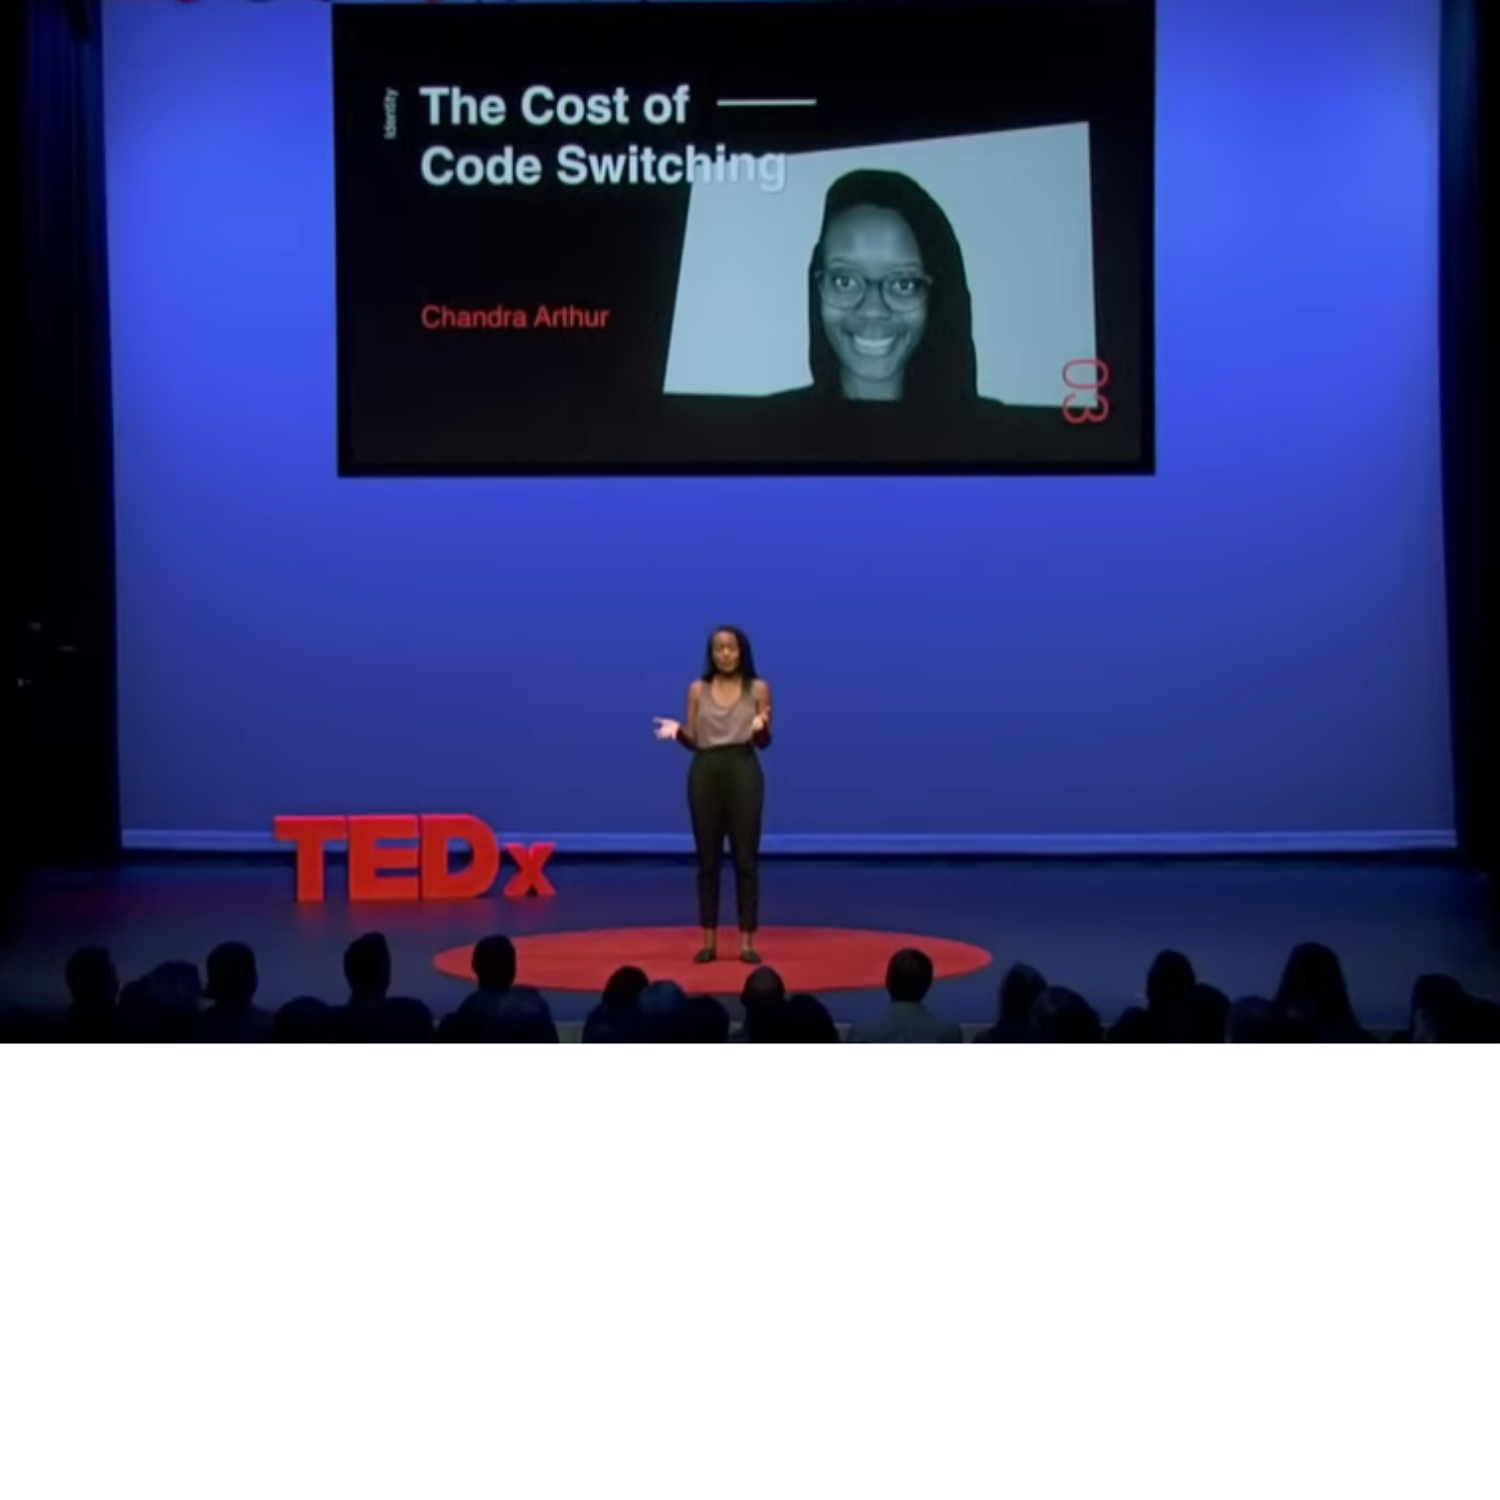 The Cost of Code Switching Ted Talk